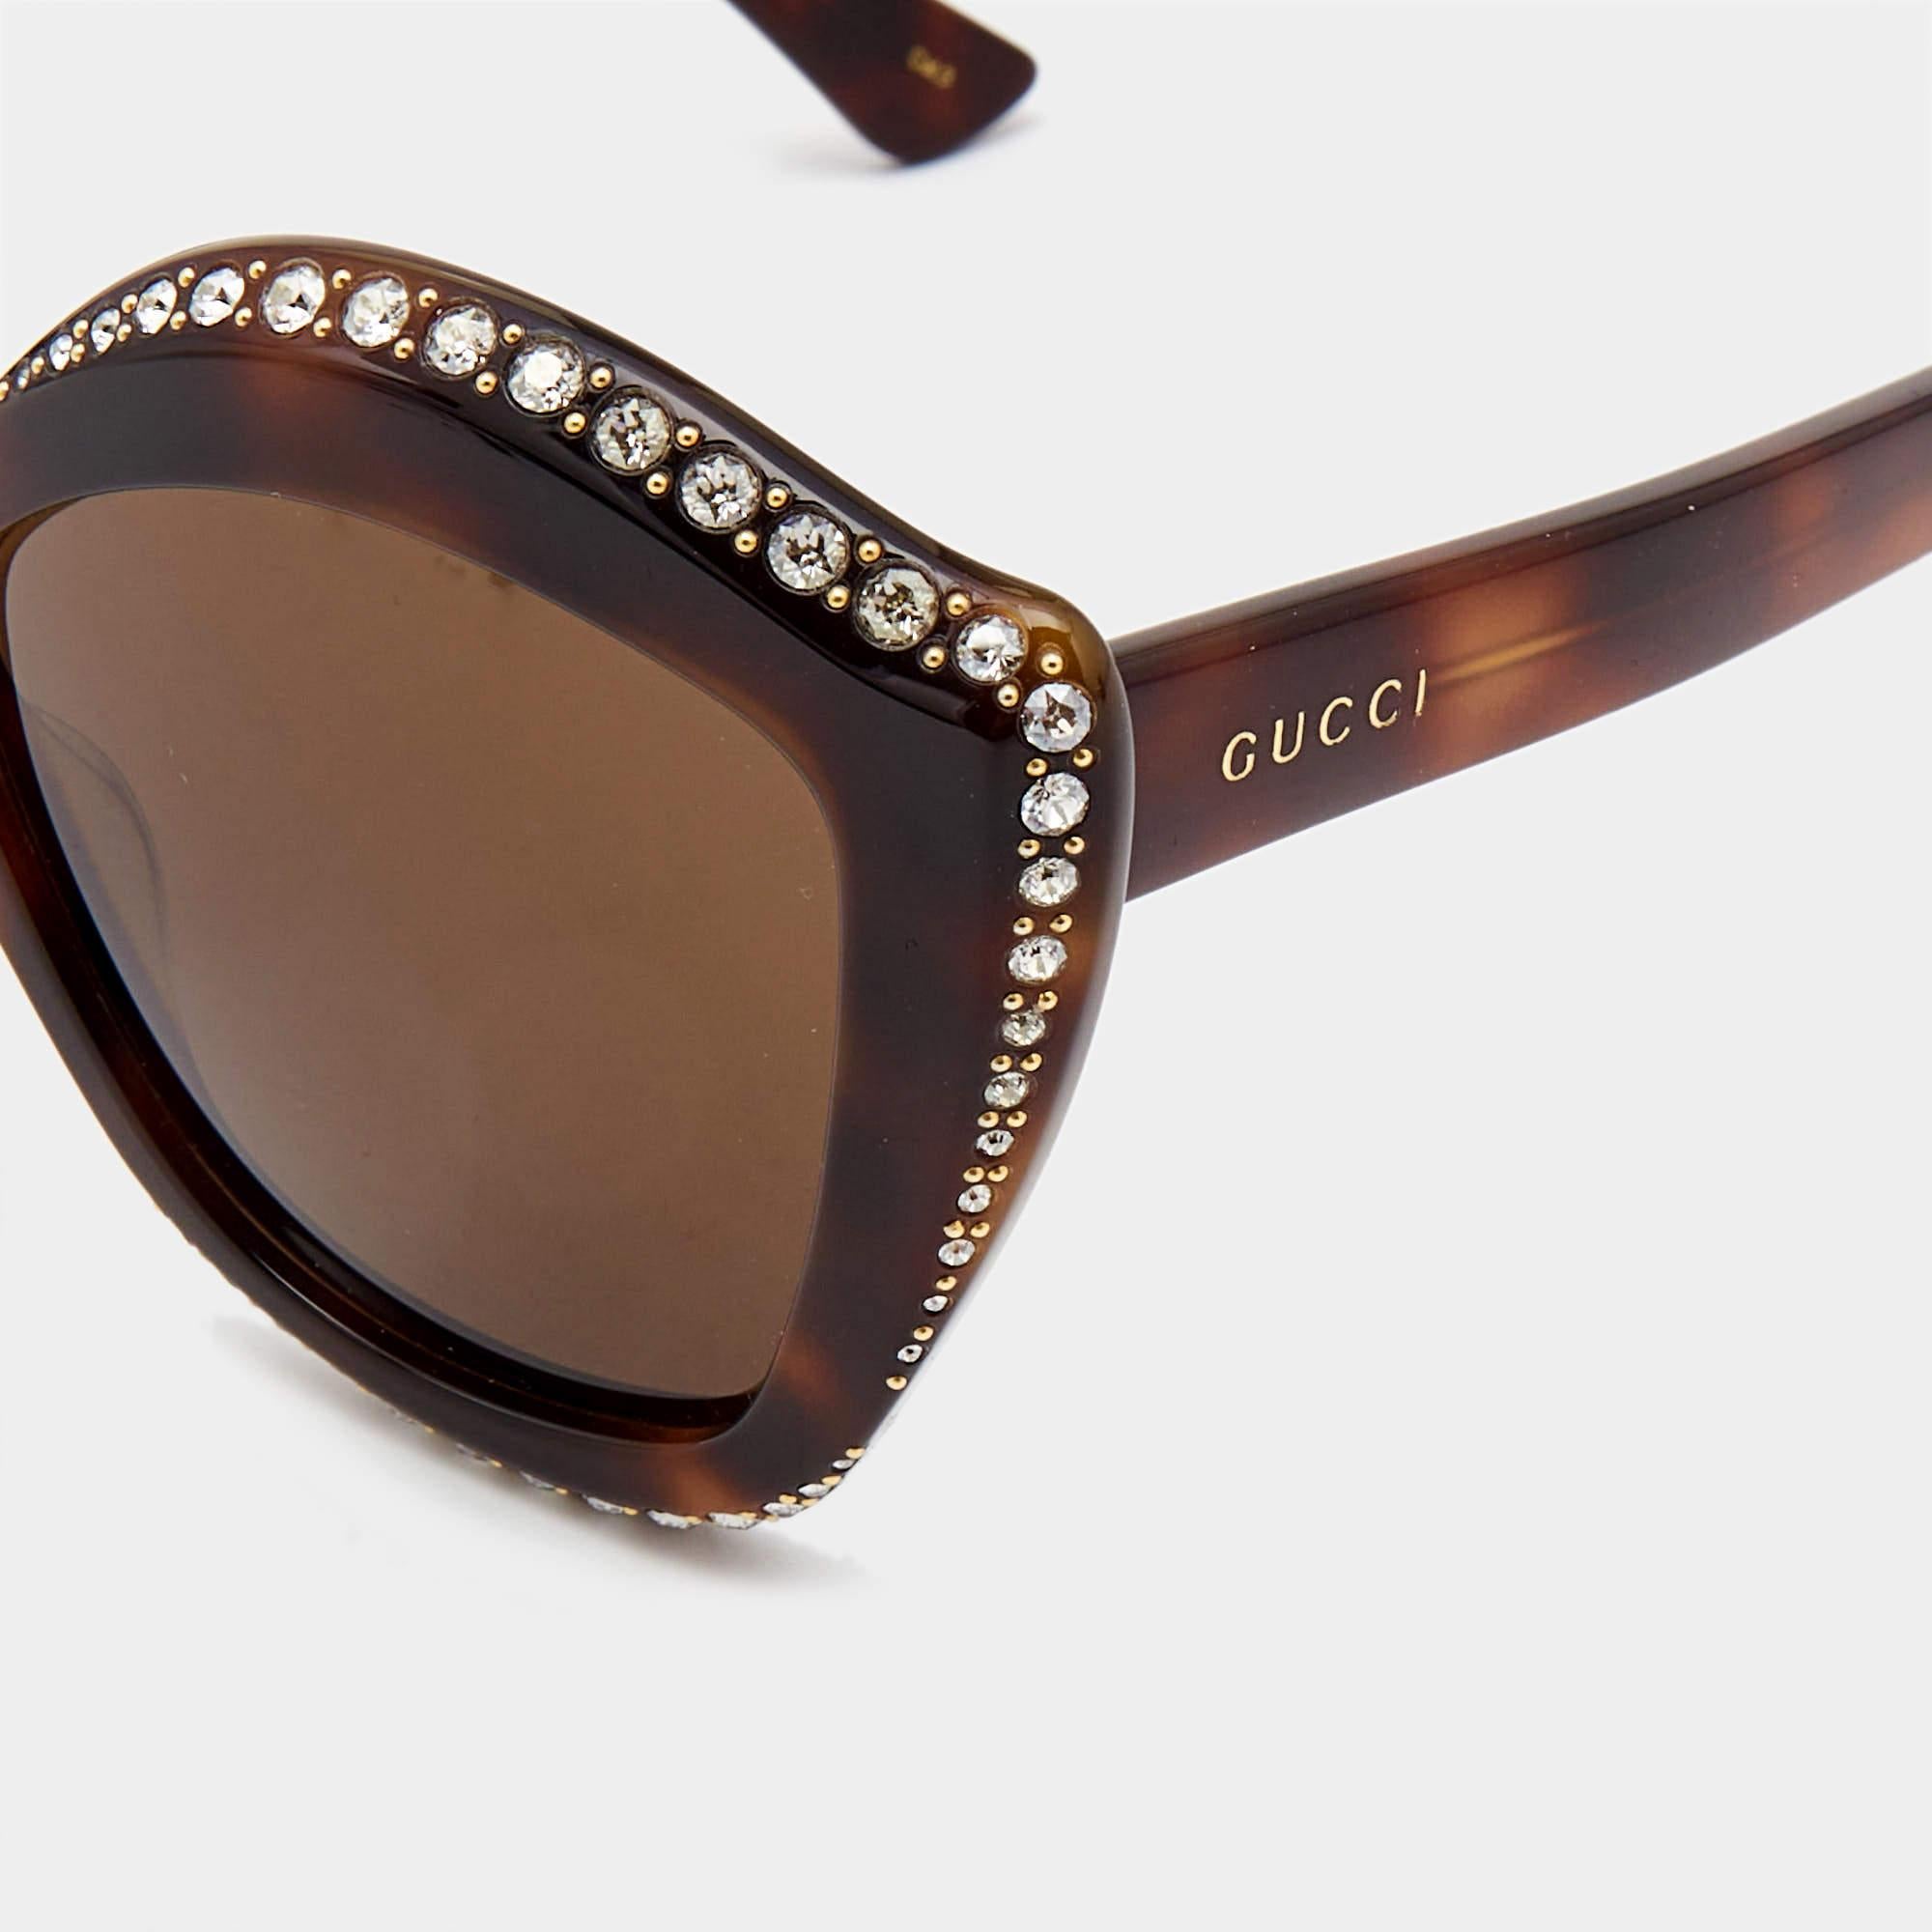 We see the detailing on this exquisite pair of designer sunglasses made from fine materials. The sunglasses are luxe in appeal and practical in usage.

Includes
Original Pouch